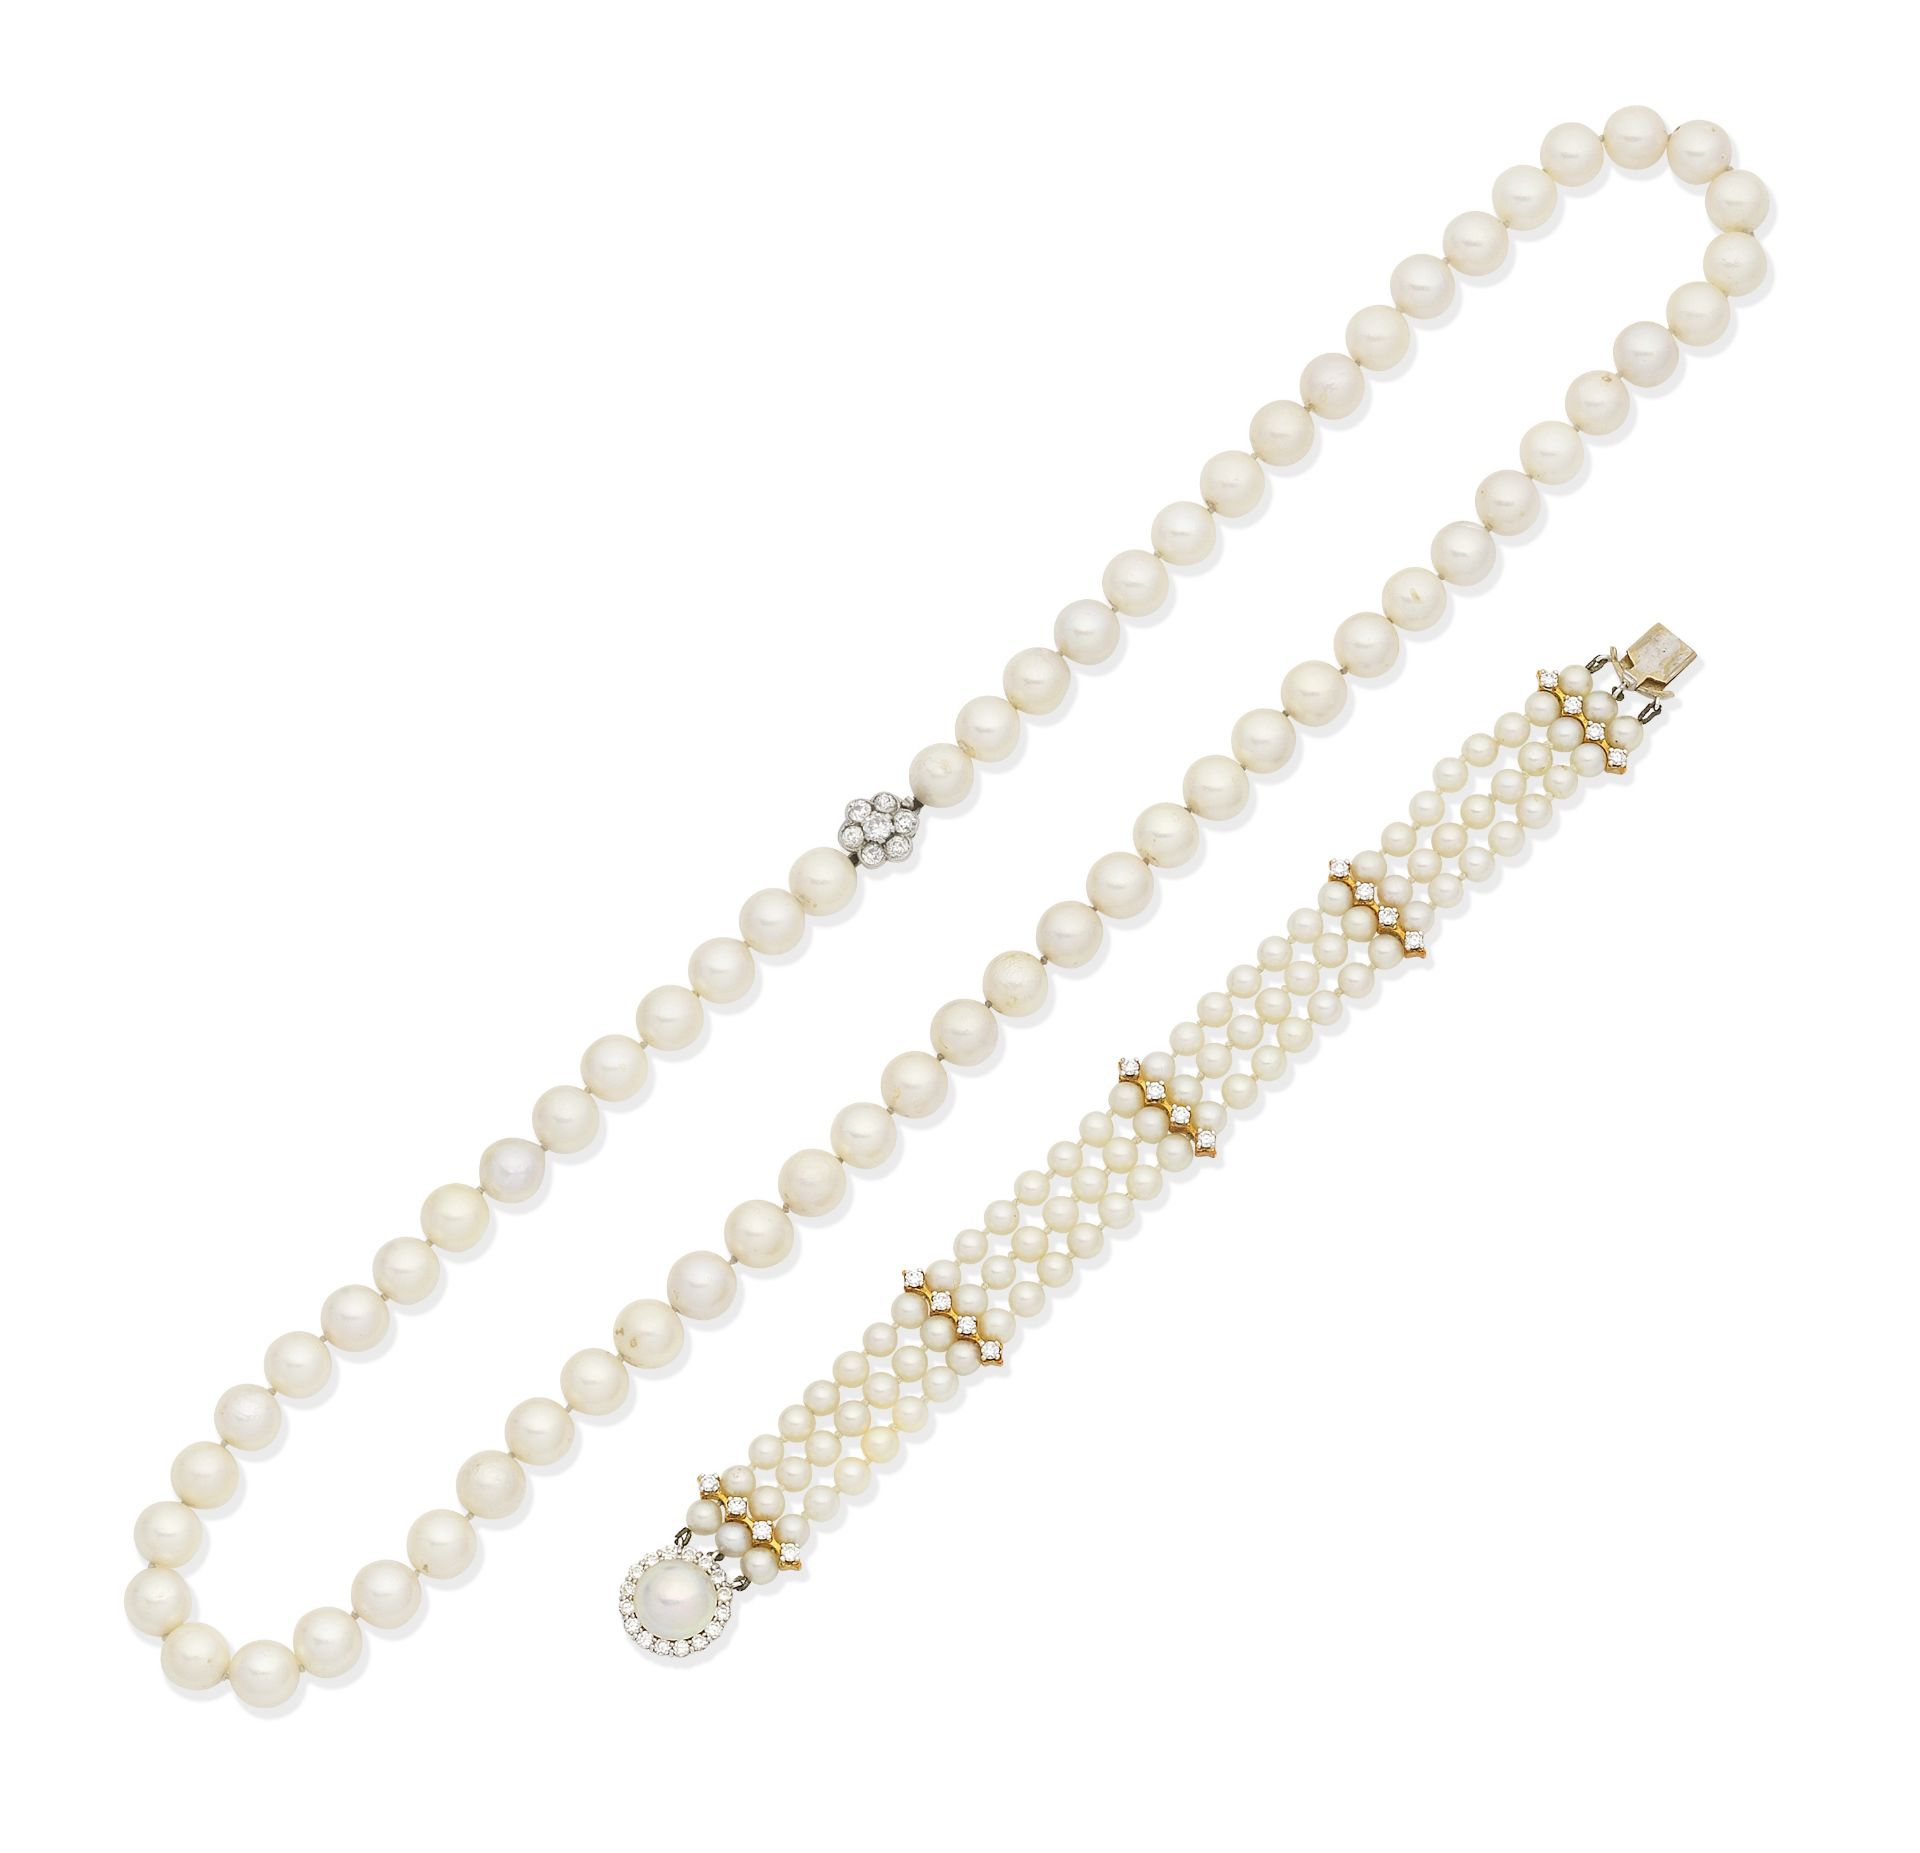 Cultured pearl and diamond necklace and bracelet